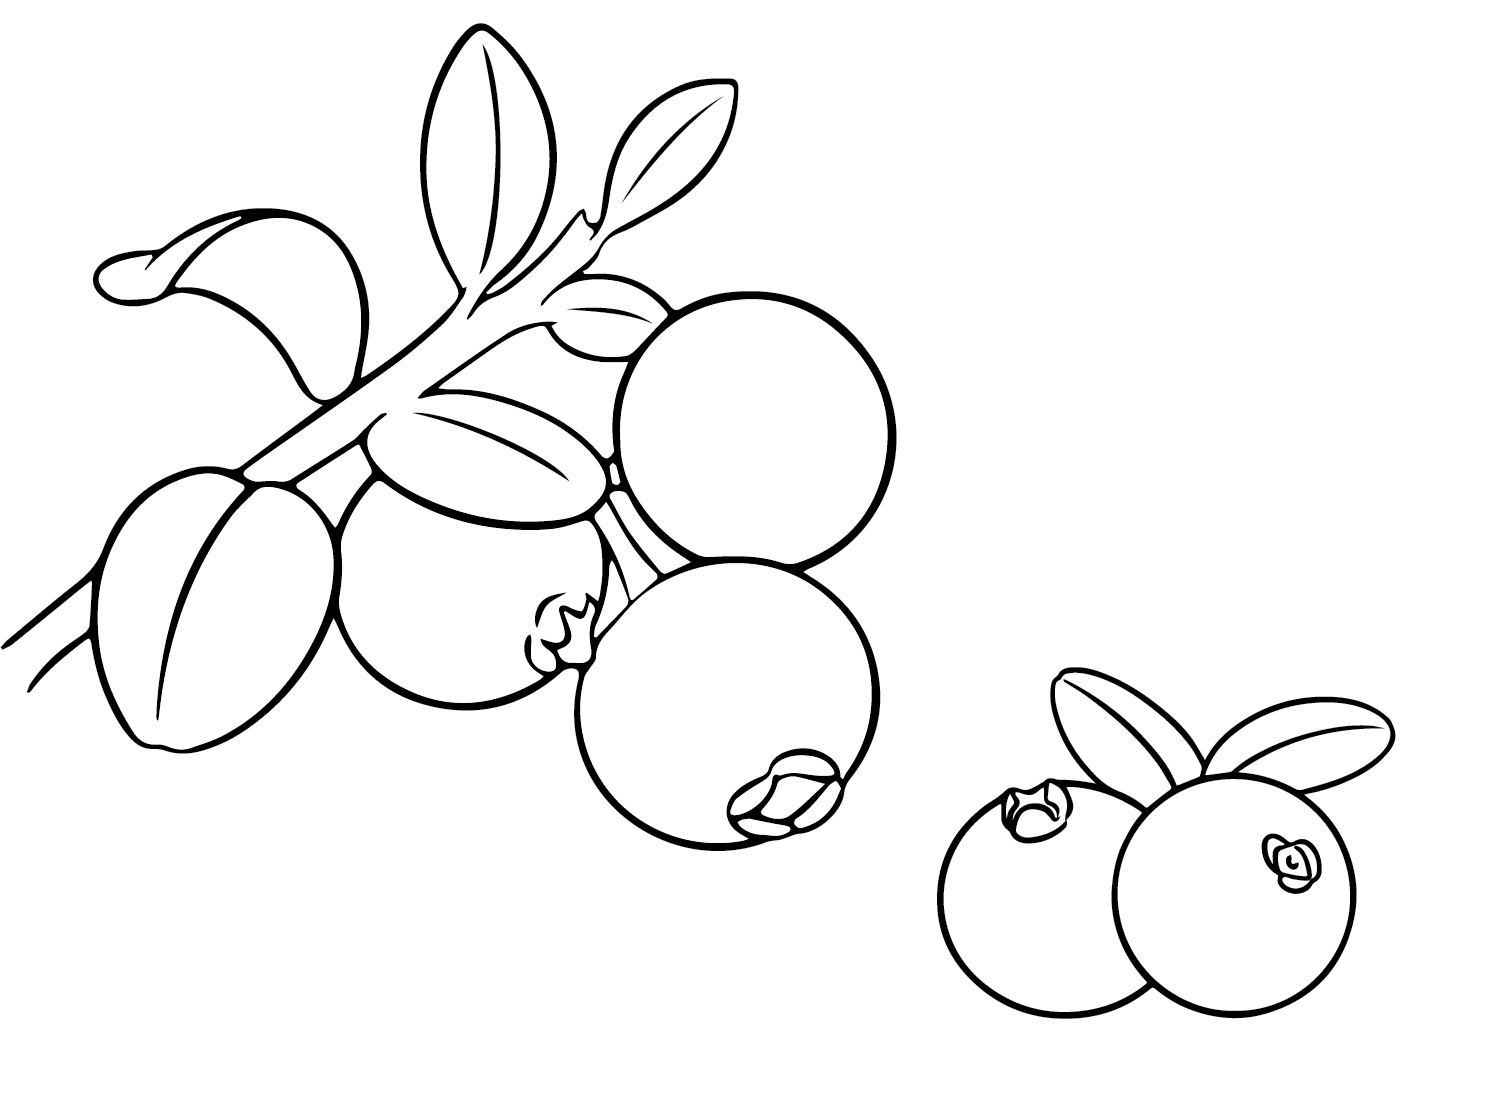 Cranberry to Print Coloring Page